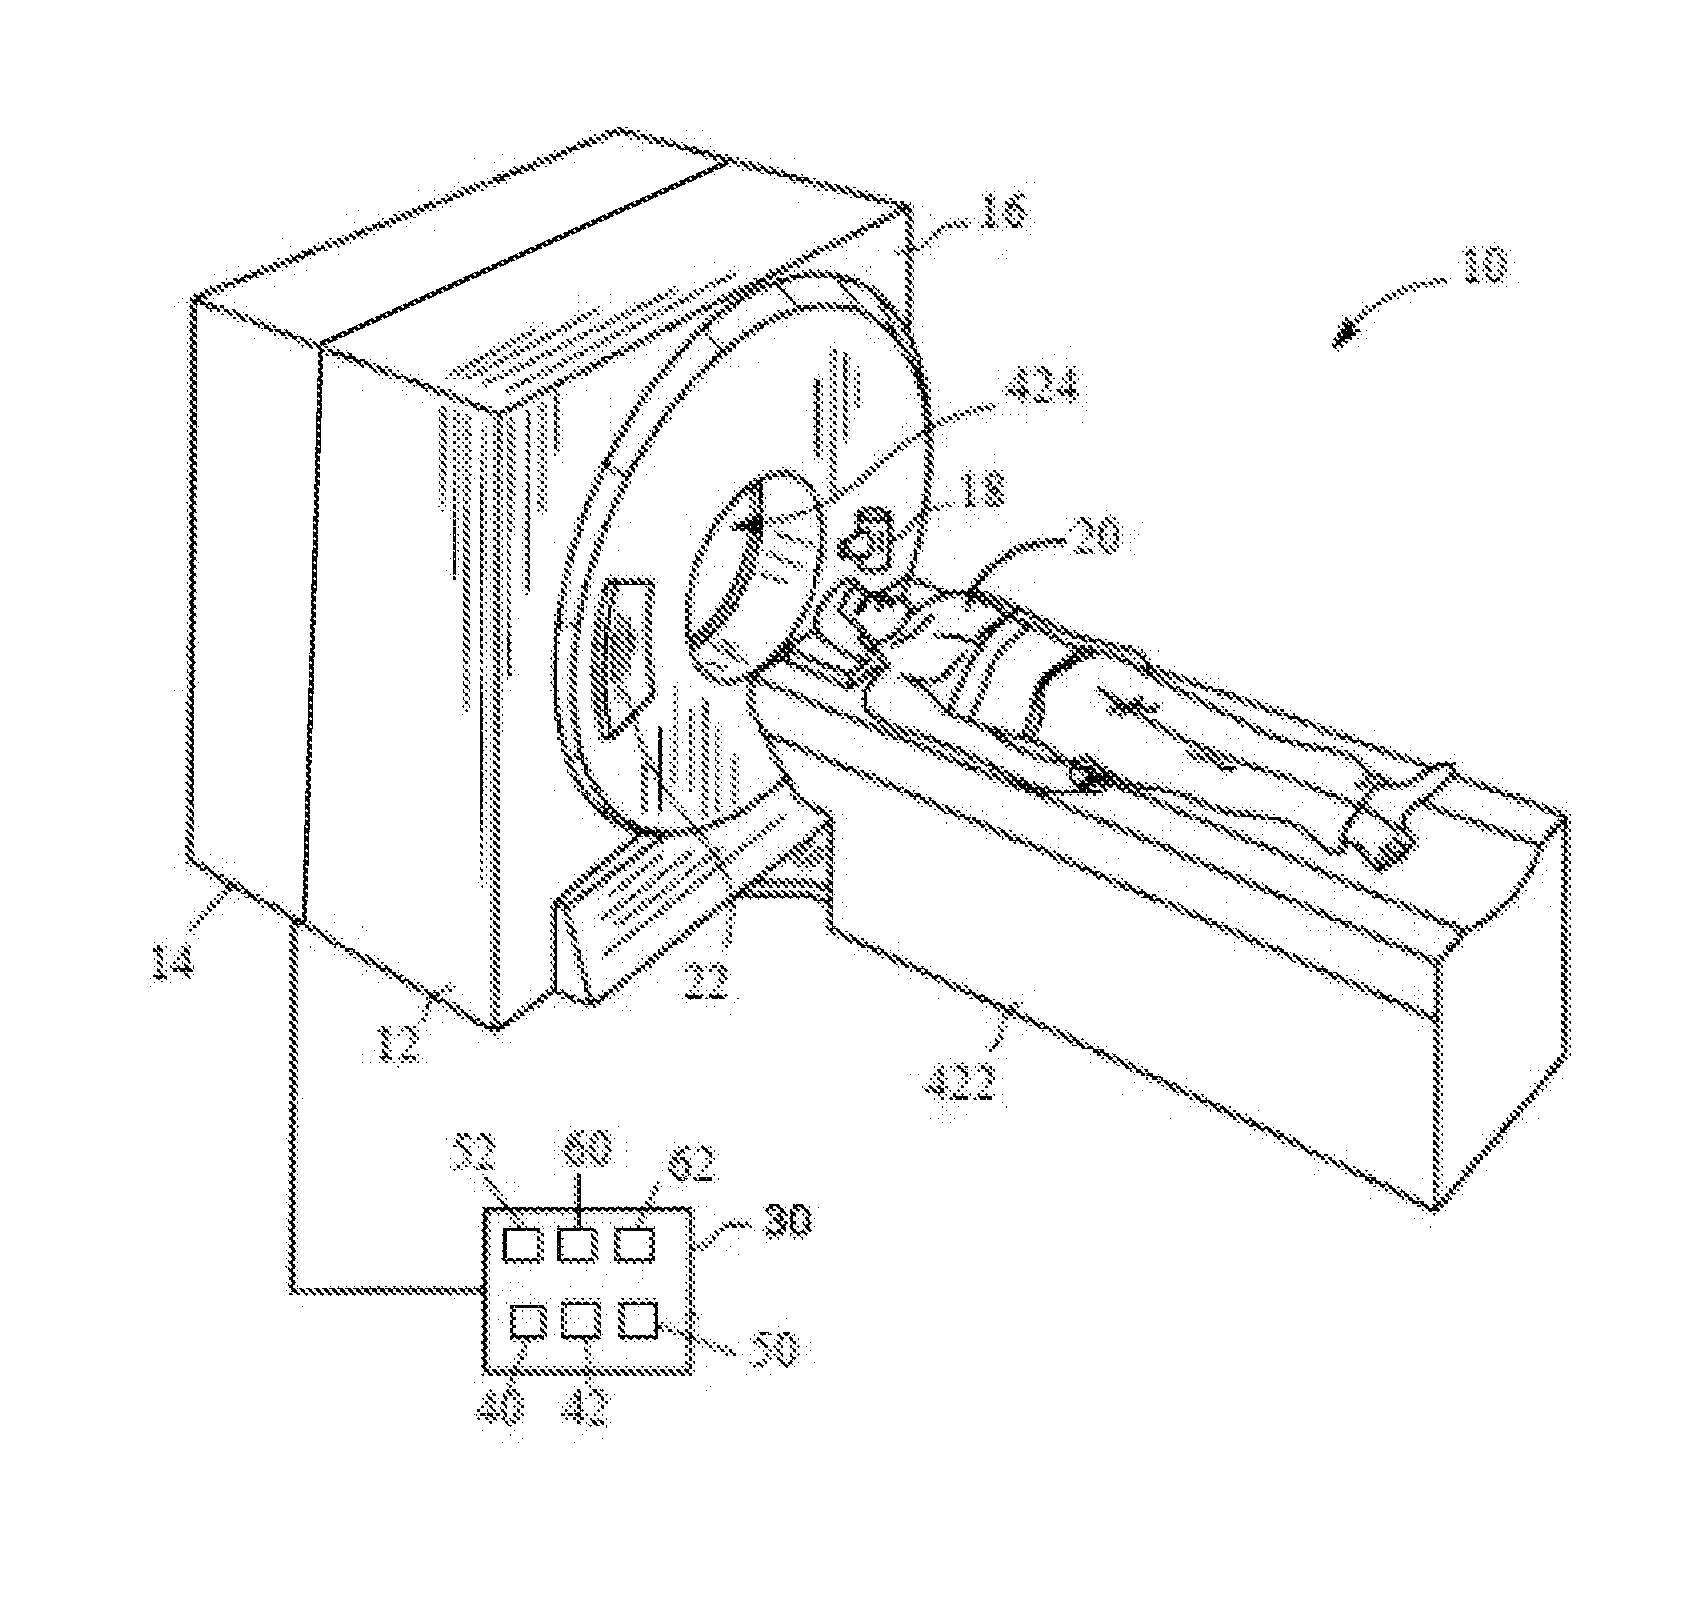 Method and apparatus for motion correcting medical images